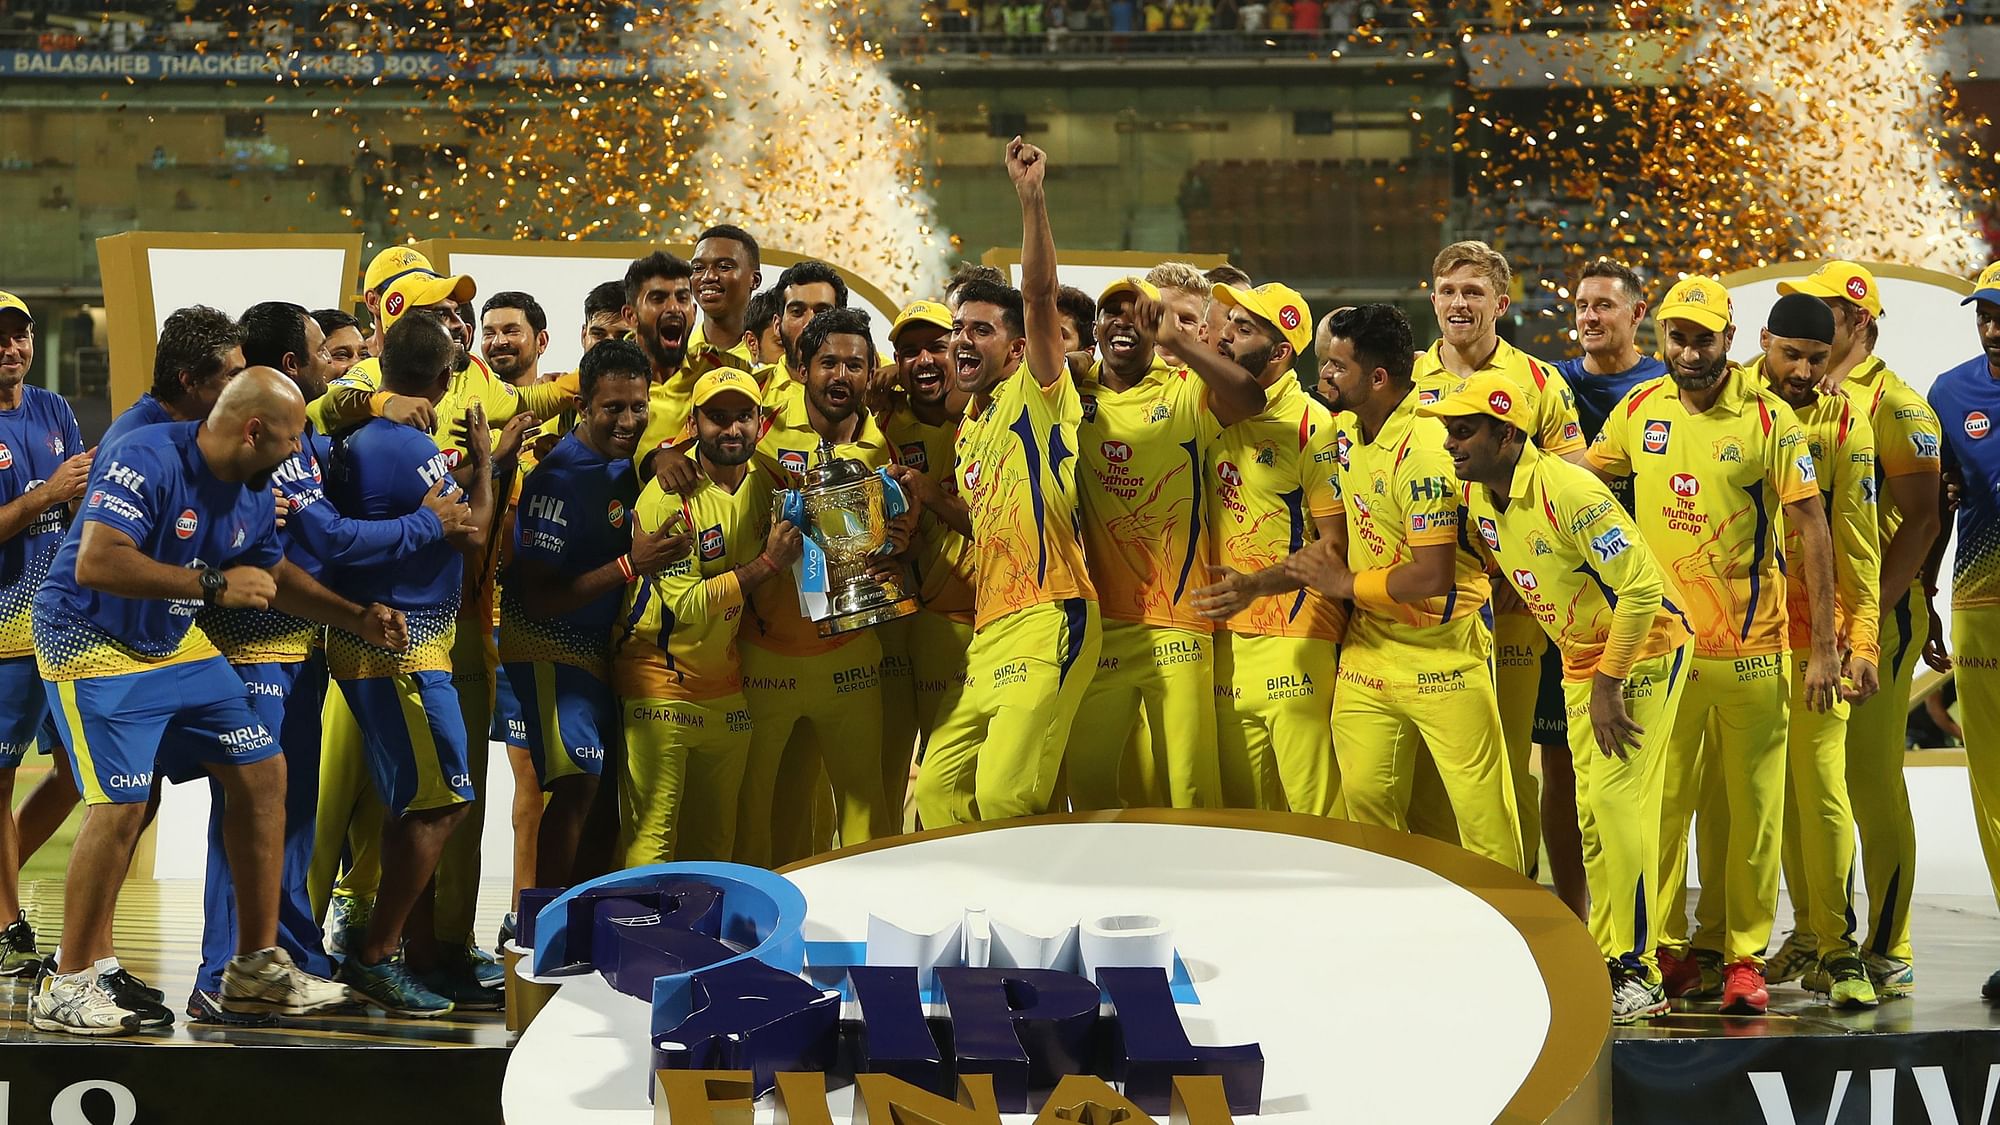 Chennai Super Kings returned to the IPL from a two-year ban in style, winning the IPL 2018 title in May.